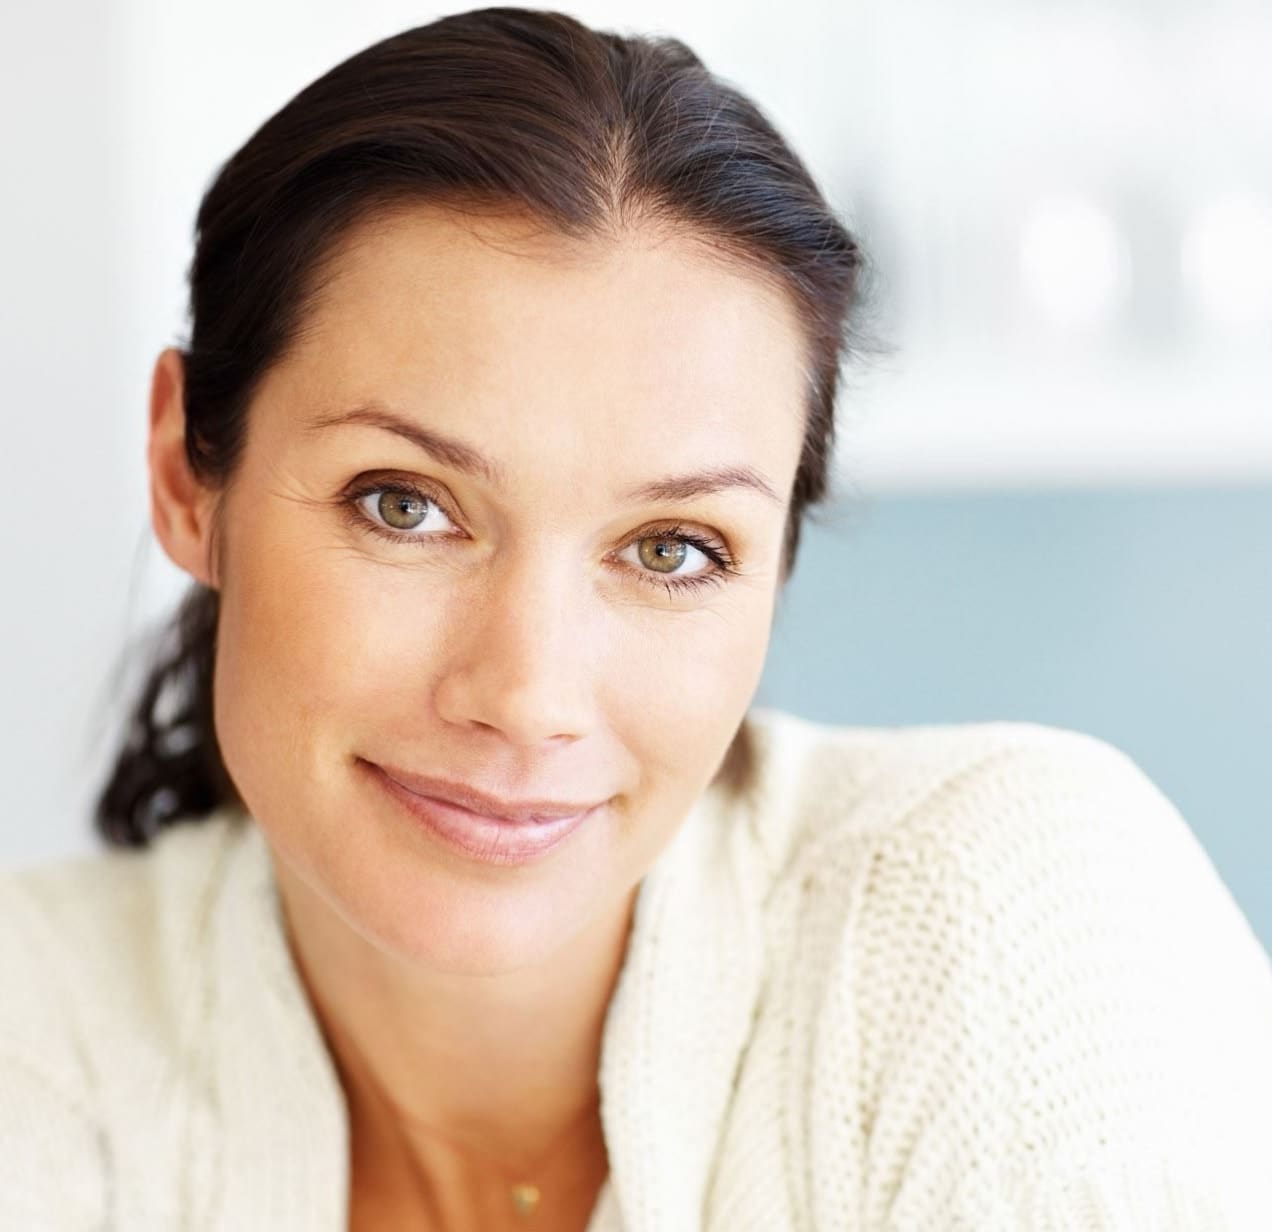 Woman with brown eyes wearing a white sweater